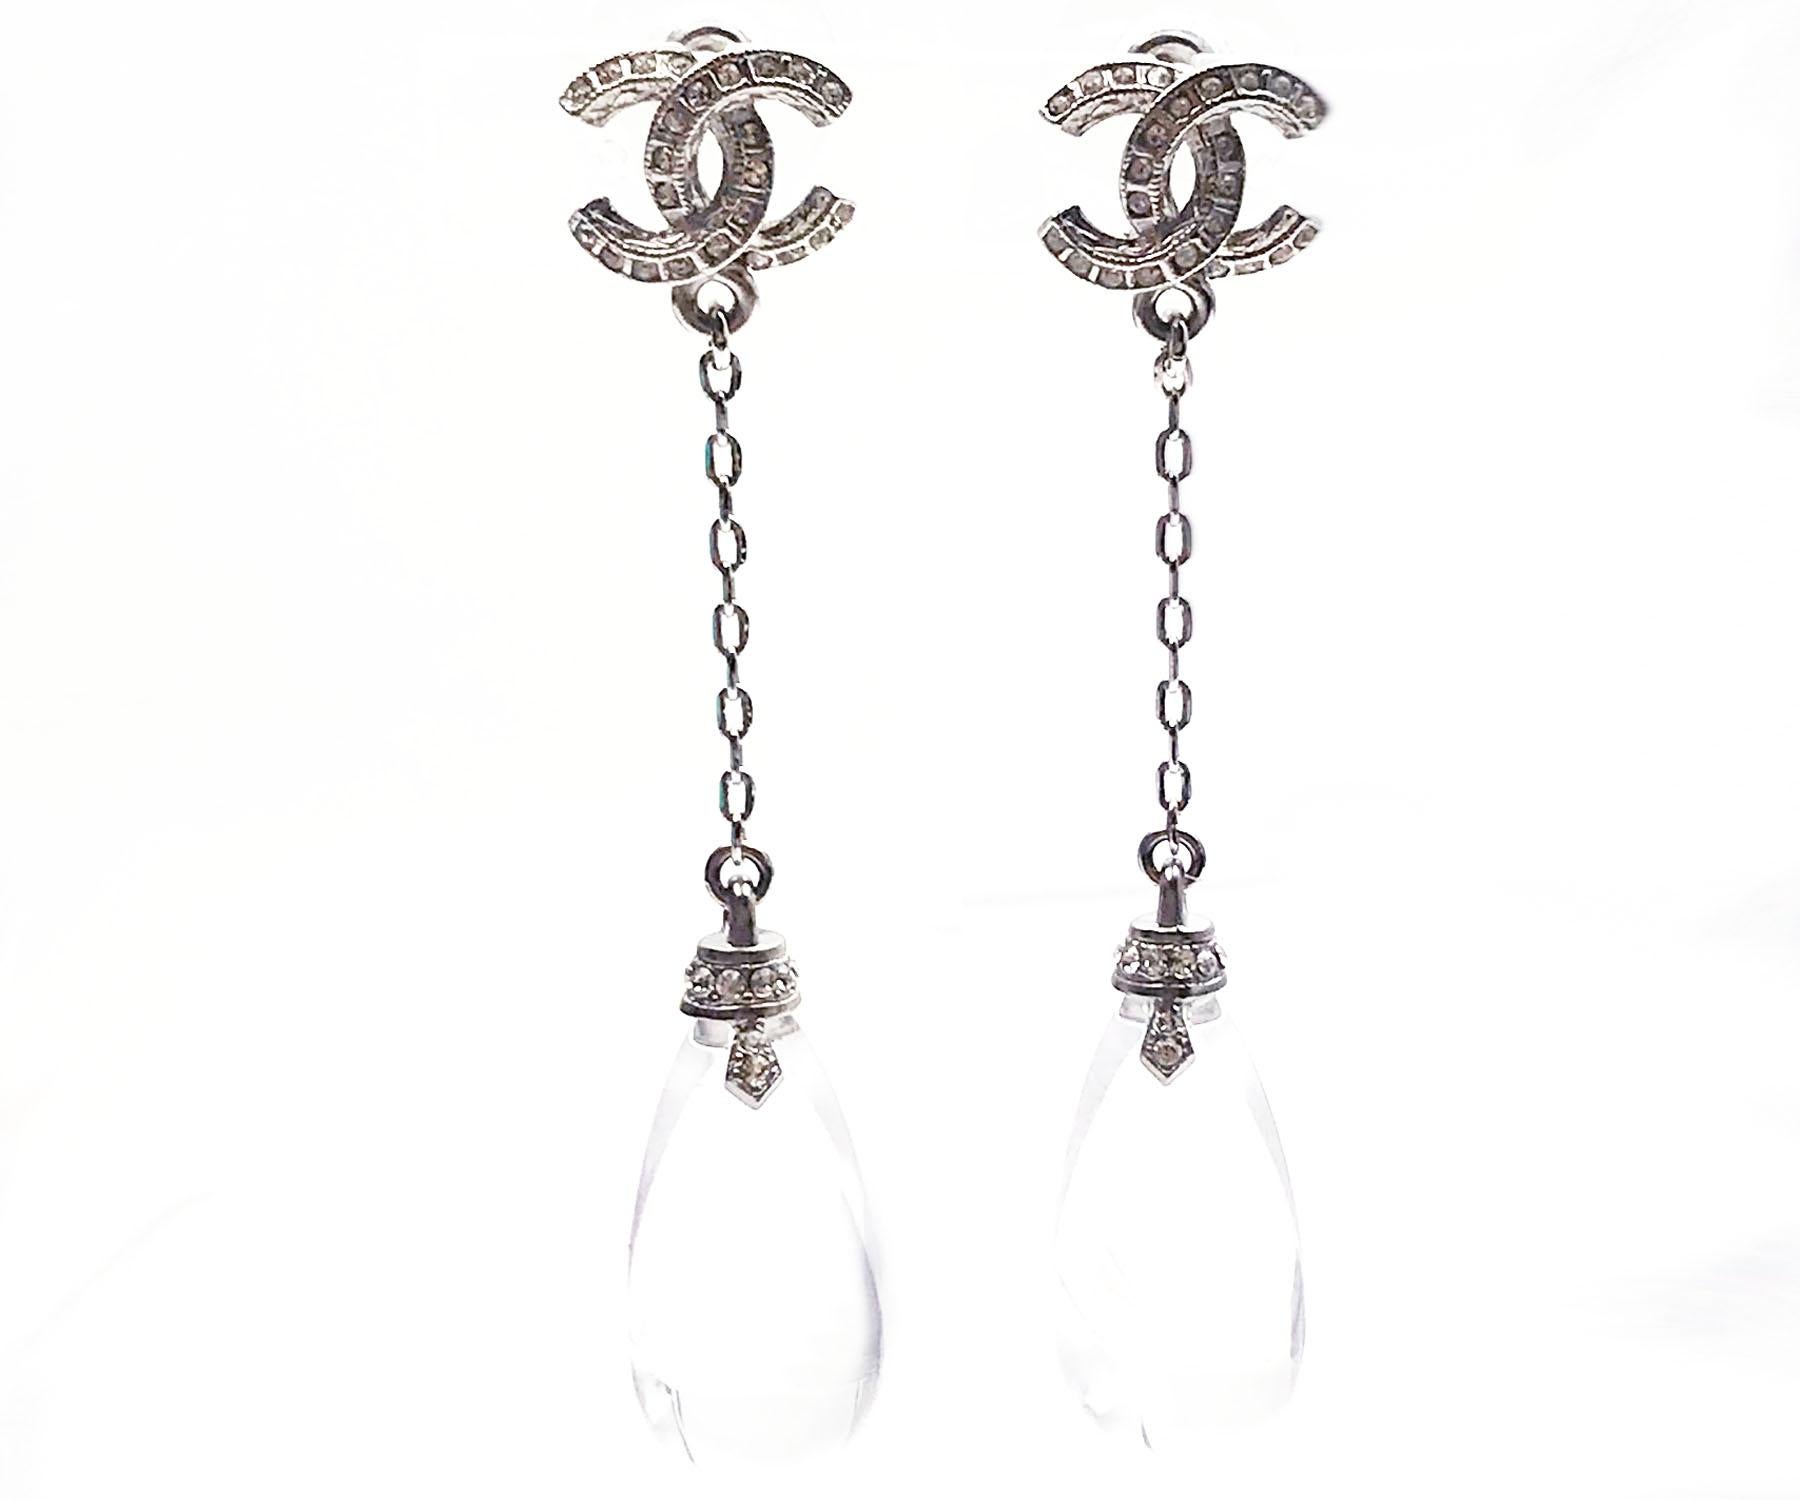 Chanel Silver CC Water Drop Dangle Long Piercing Earrings

*Marked 18
*Made in France
*Comes with the original box, pouch, booklet and ribbon

-Approximately 0.5